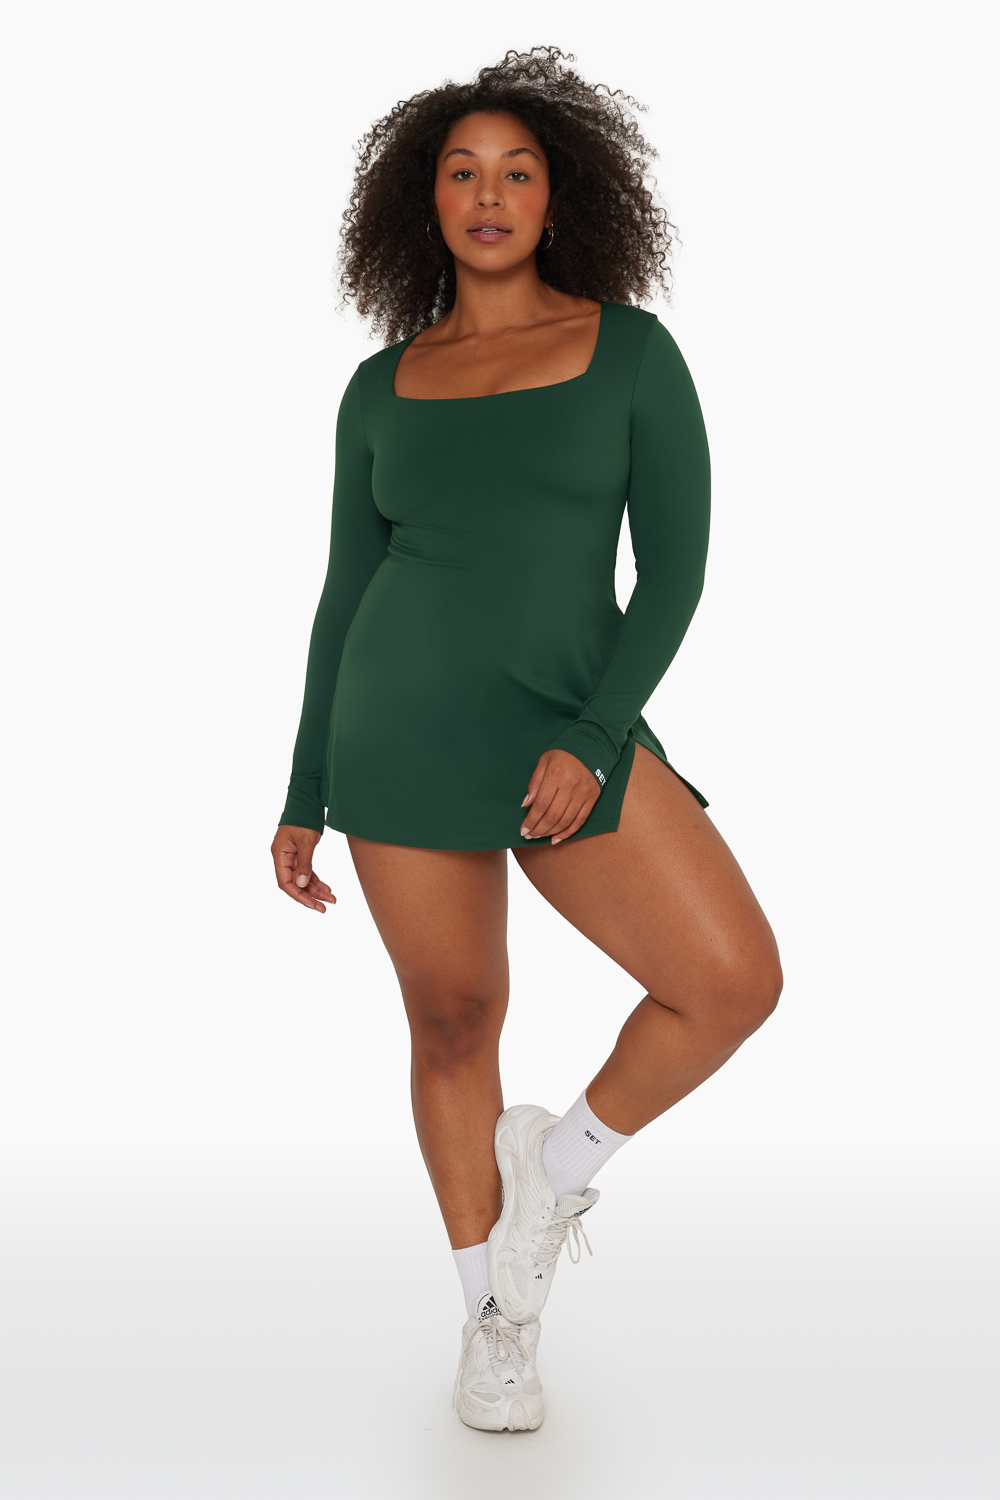 SPORTBODY® CROSSOVER DRESS - SYCAMORE Featured Image